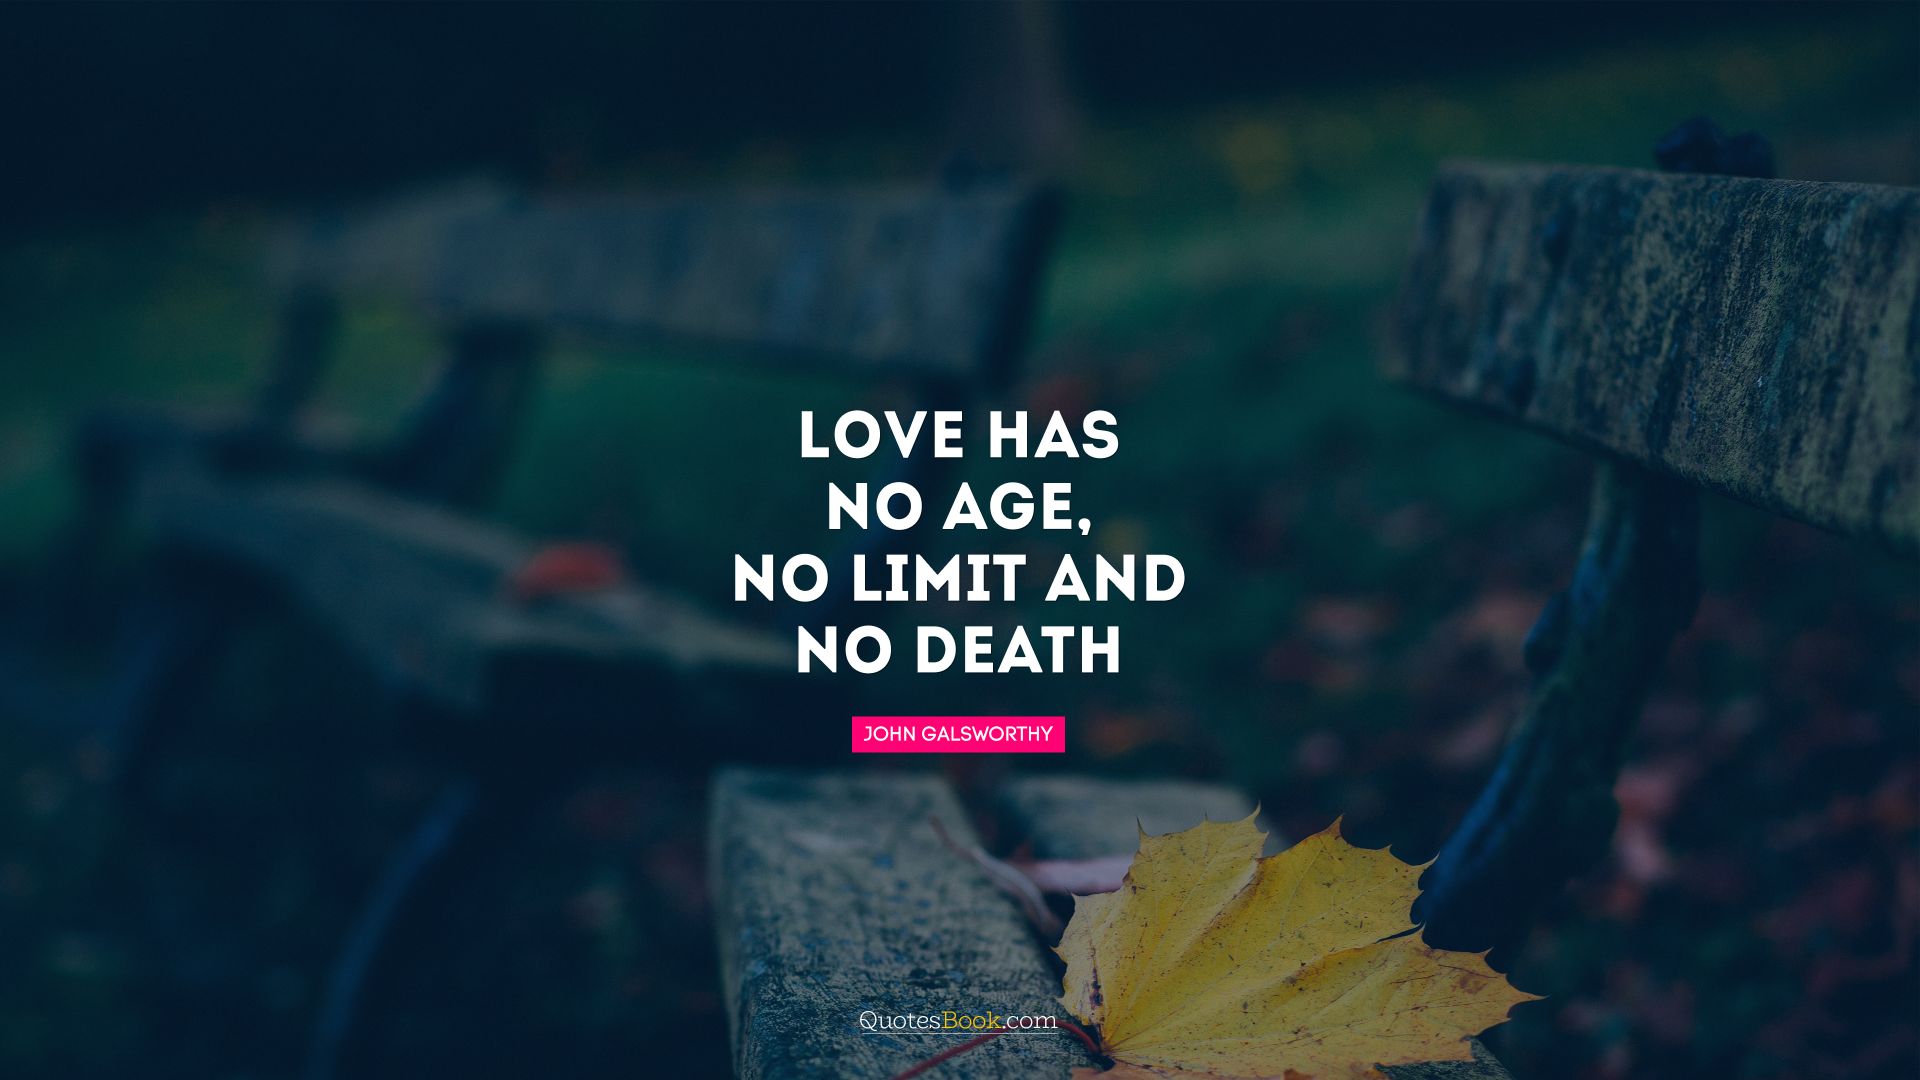 Love has no age, no limit and no death. - Quote by John Galsworthy